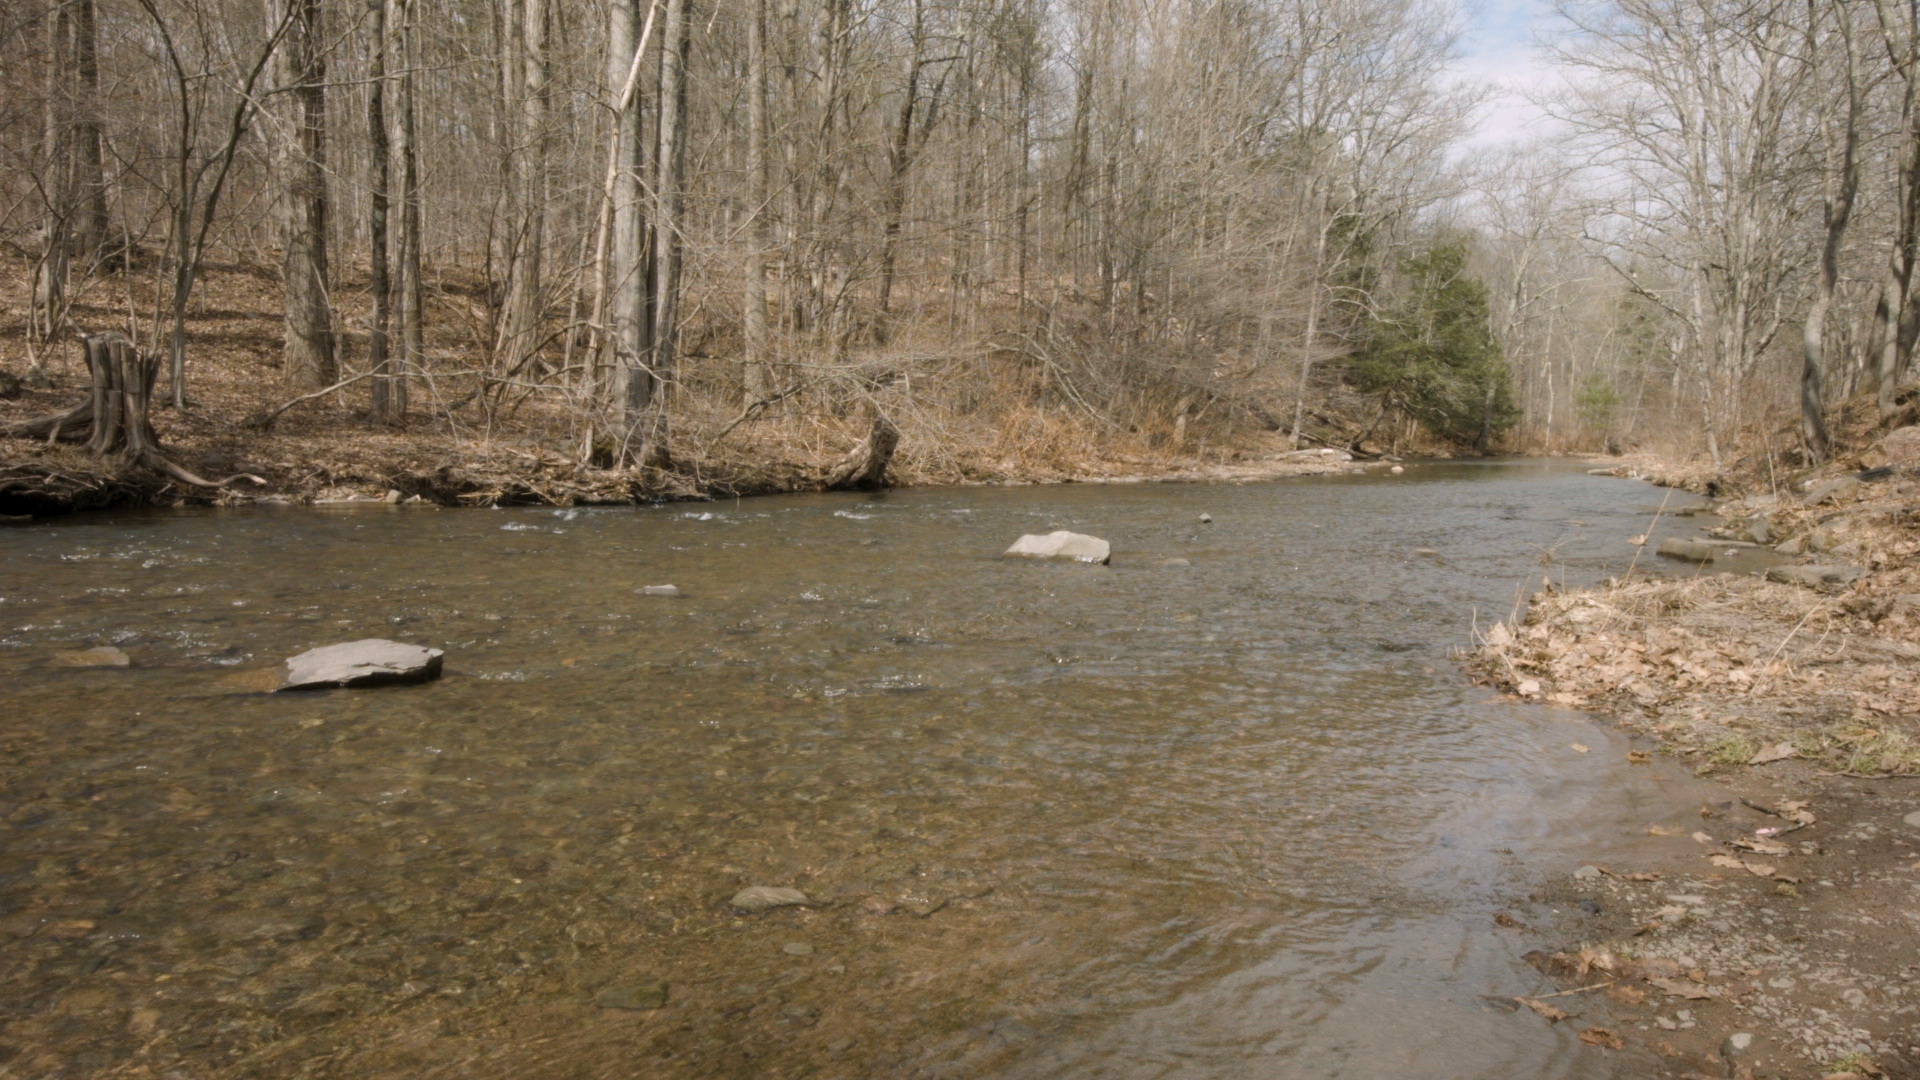 Photograph of a River from early spring in Cairo, New York